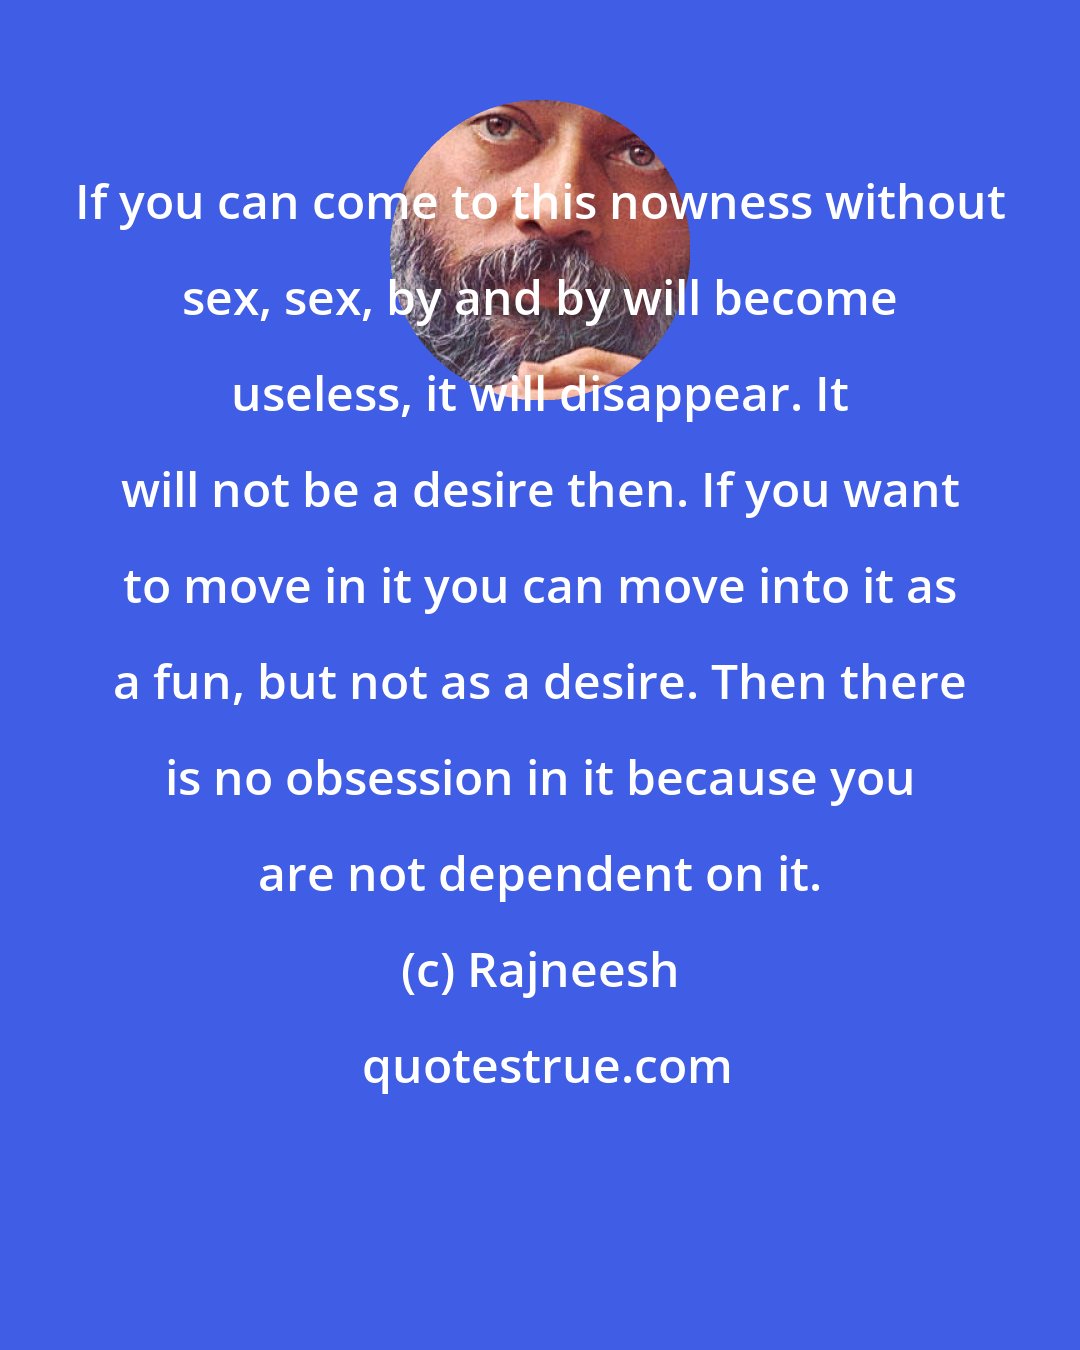 Rajneesh: If you can come to this nowness without sex, sex, by and by will become useless, it will disappear. It will not be a desire then. If you want to move in it you can move into it as a fun, but not as a desire. Then there is no obsession in it because you are not dependent on it.